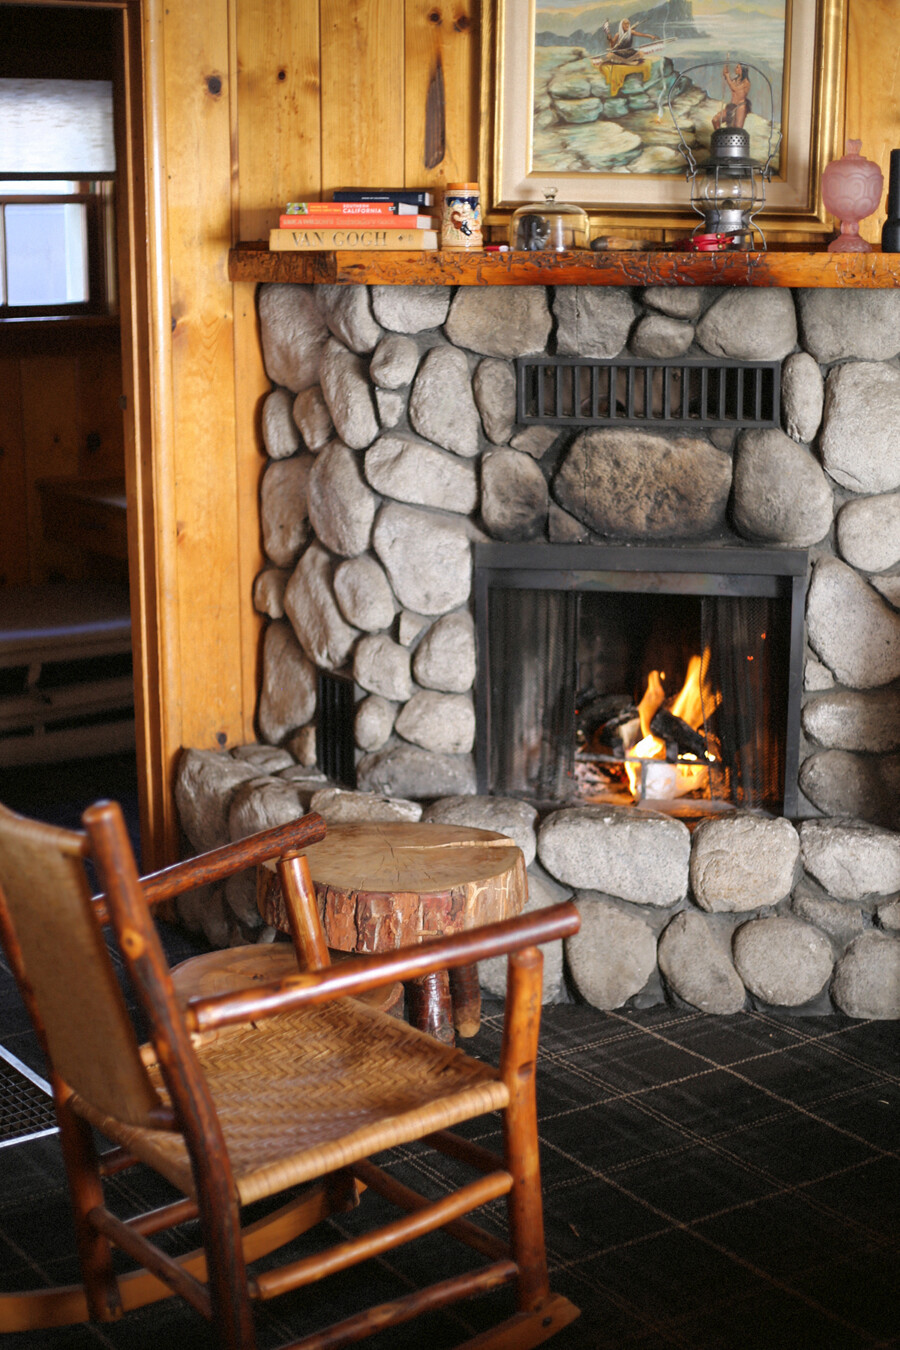 A rocking chair next to a stone fireplace at the Fireside Inn in Idyllwild, California.